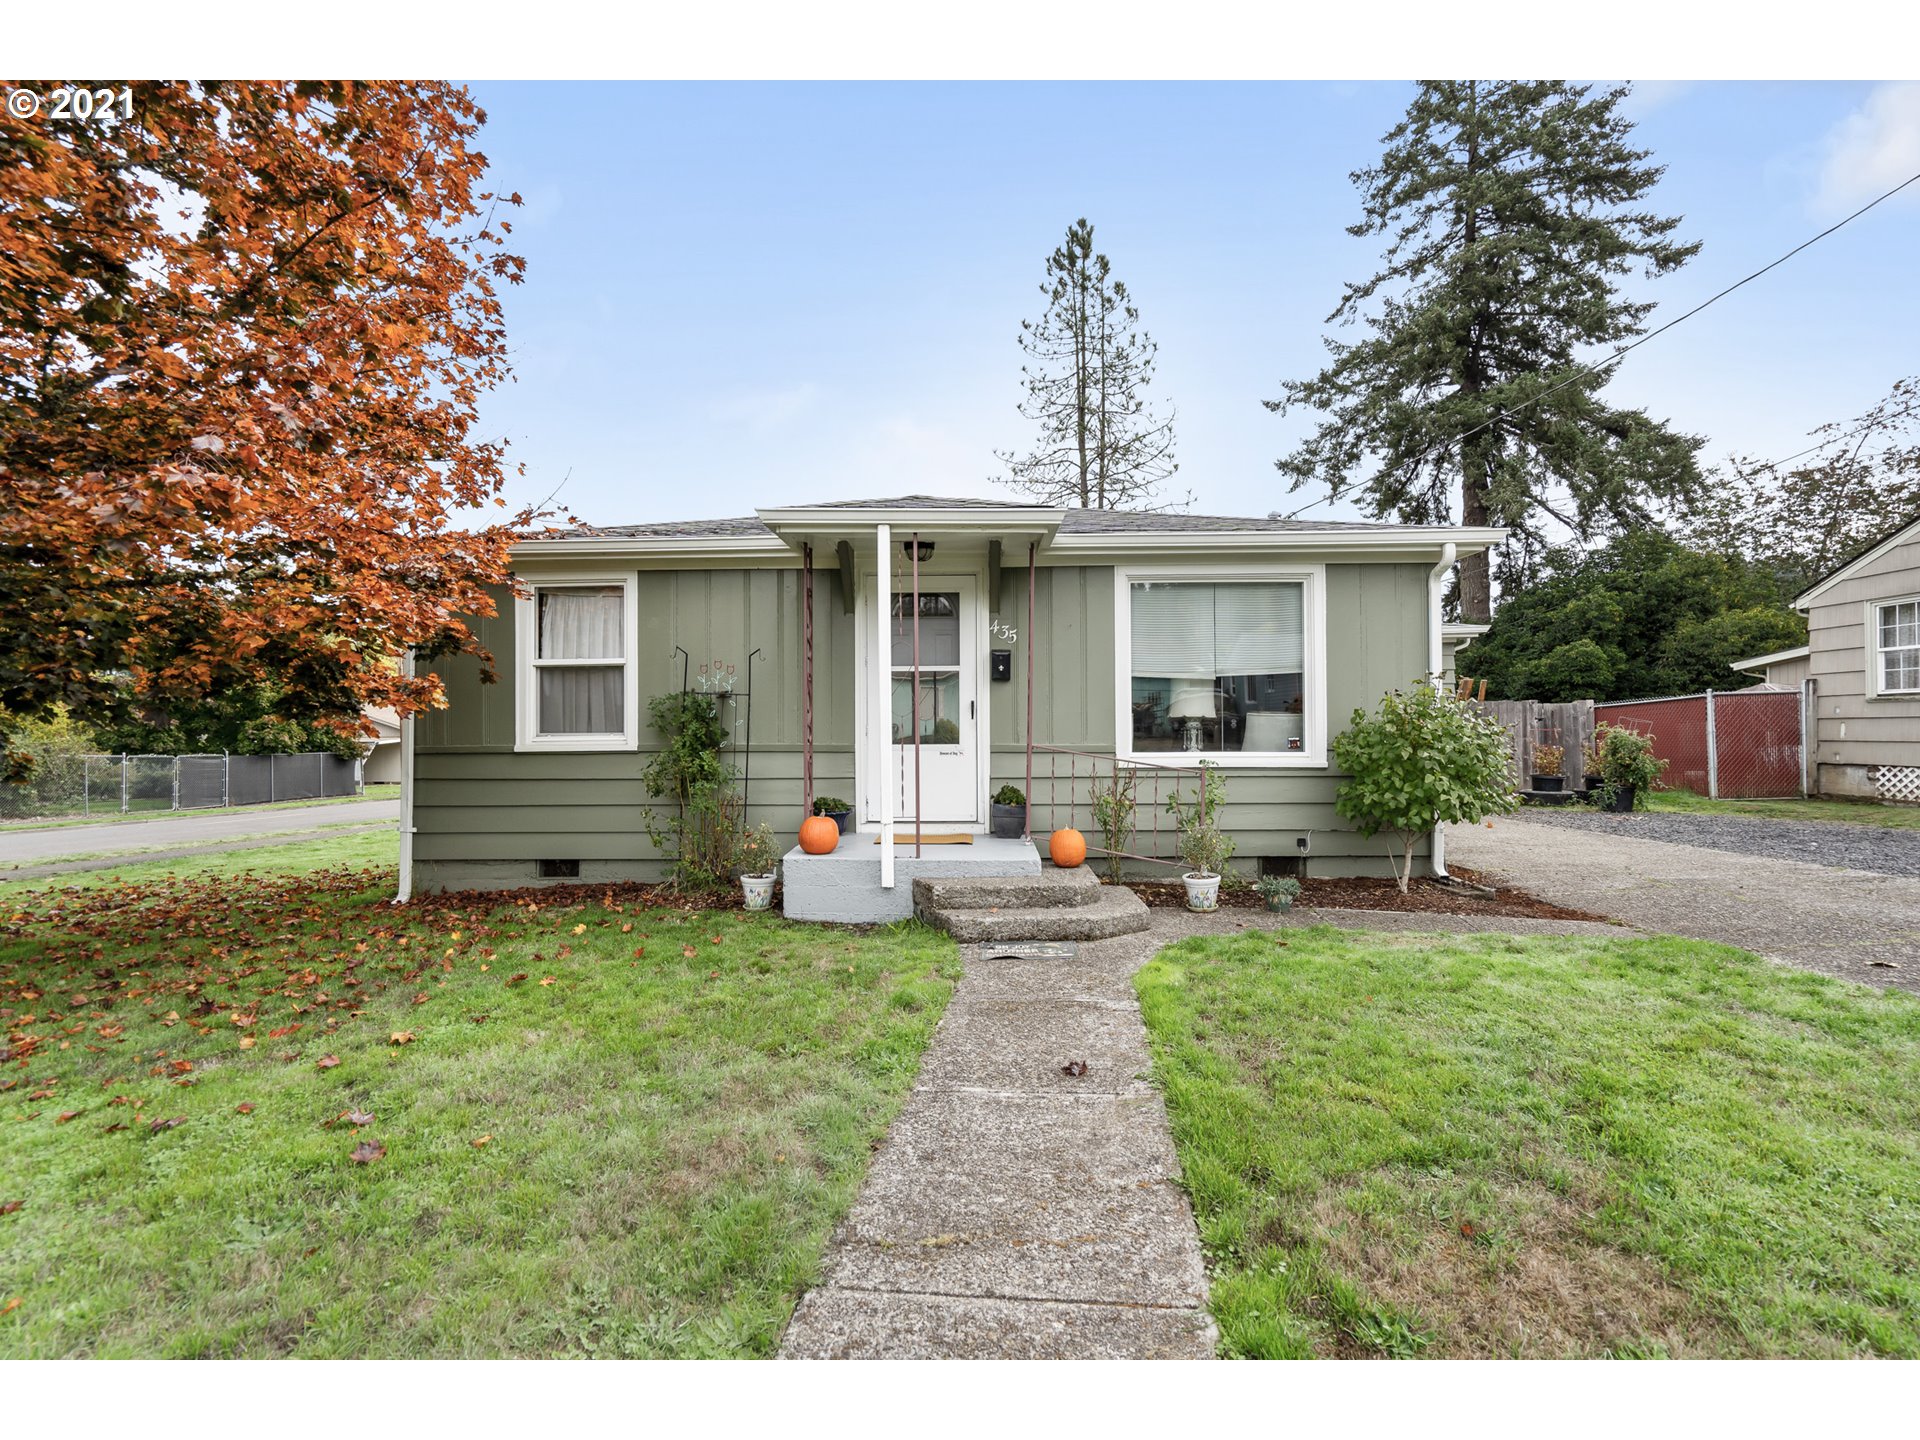 435 7TH AVE (1 of 16)